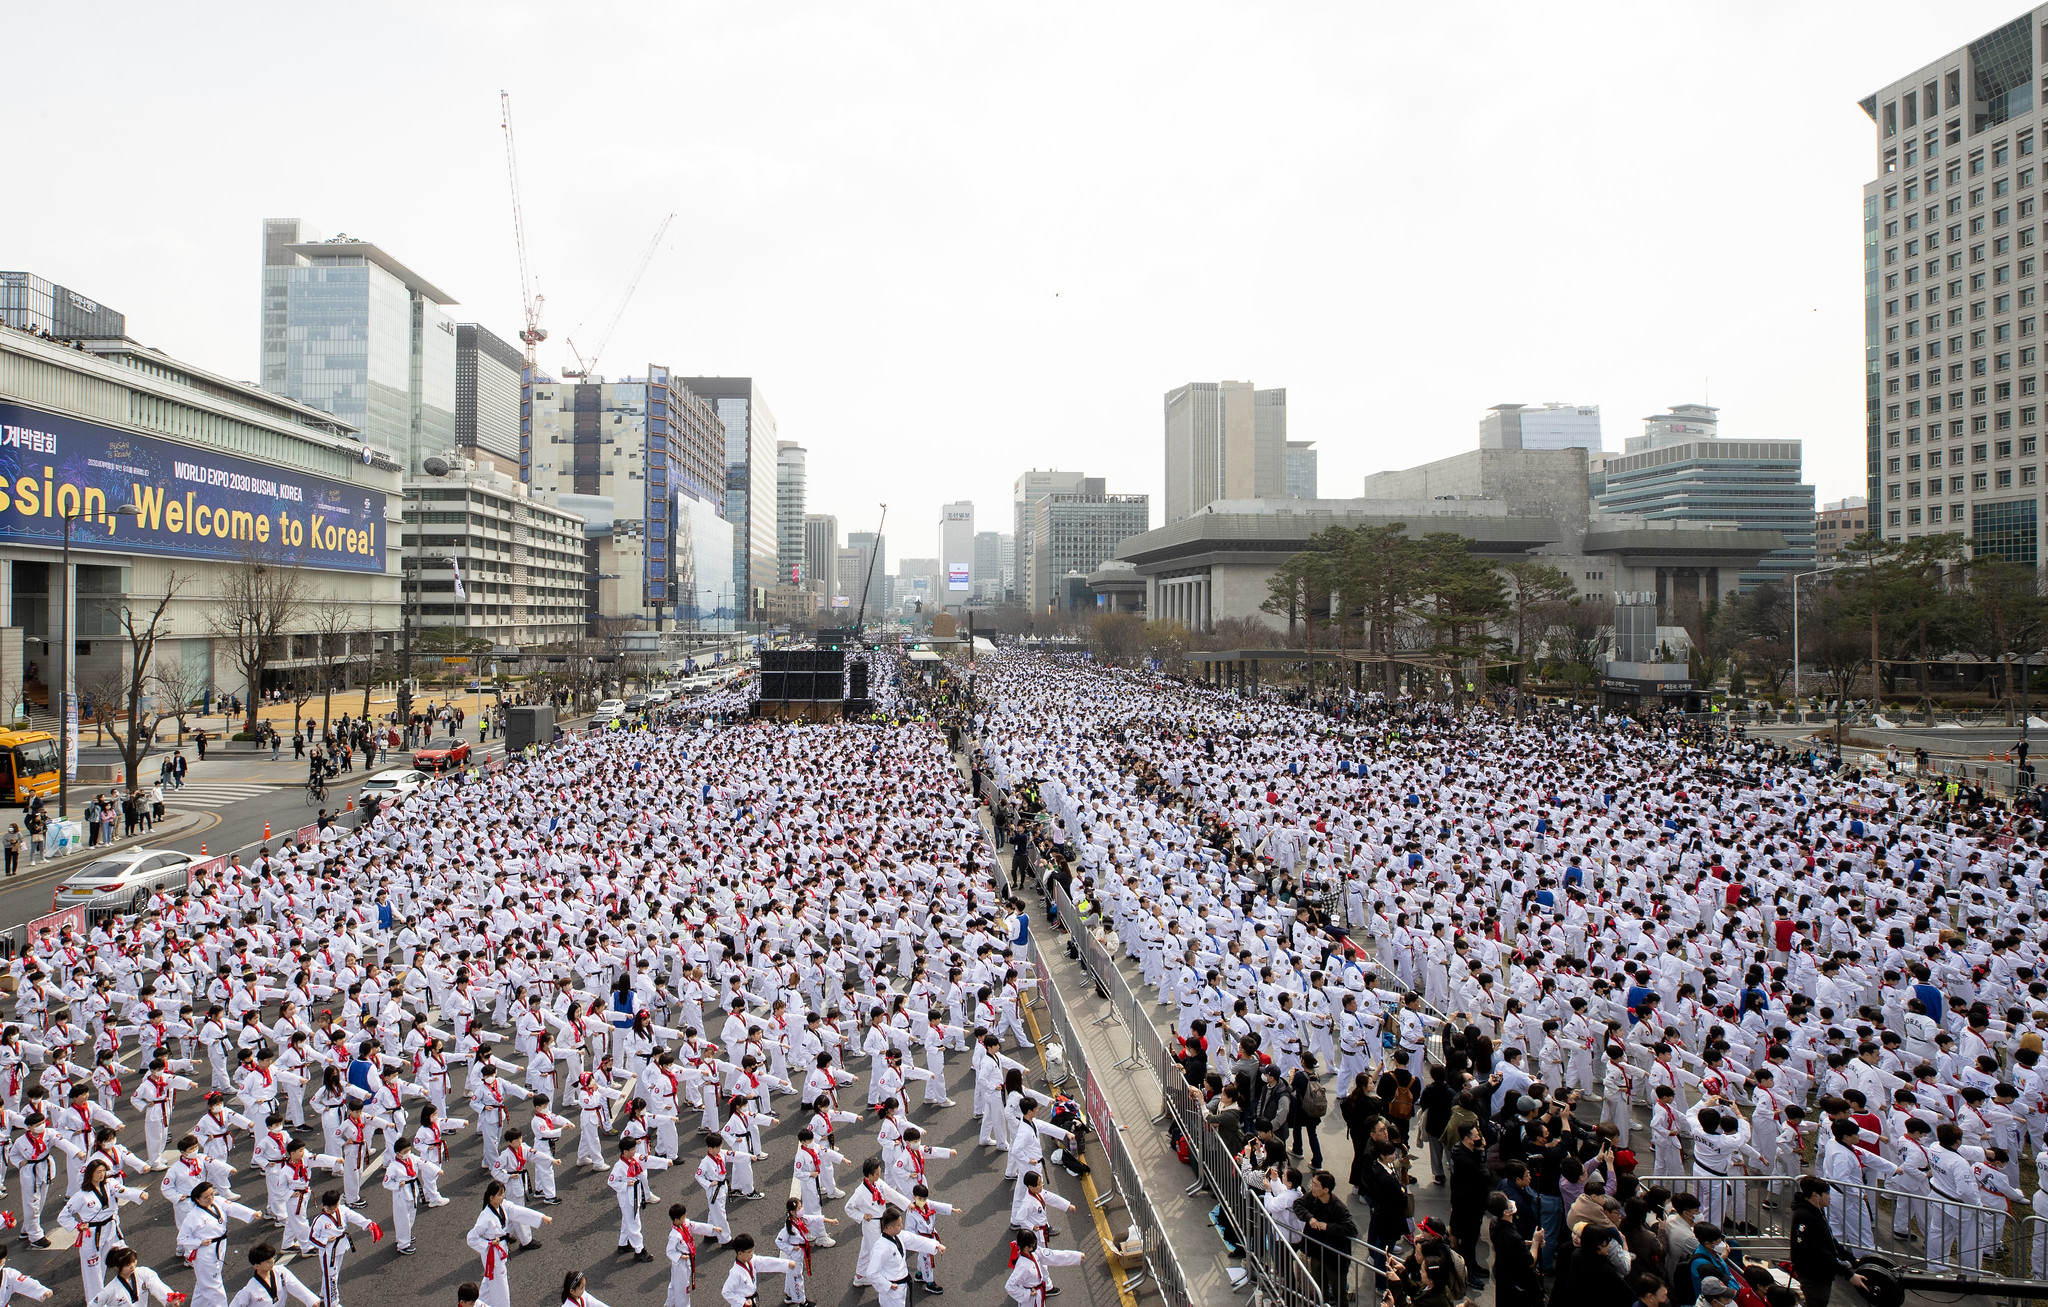 Over 12,000 people on the afternoon of March 25 gather at Gwanghwamun Square in Seoul's Jongno-gu District to set a Guinness World Record for performing a taekwondo poomsae (form).